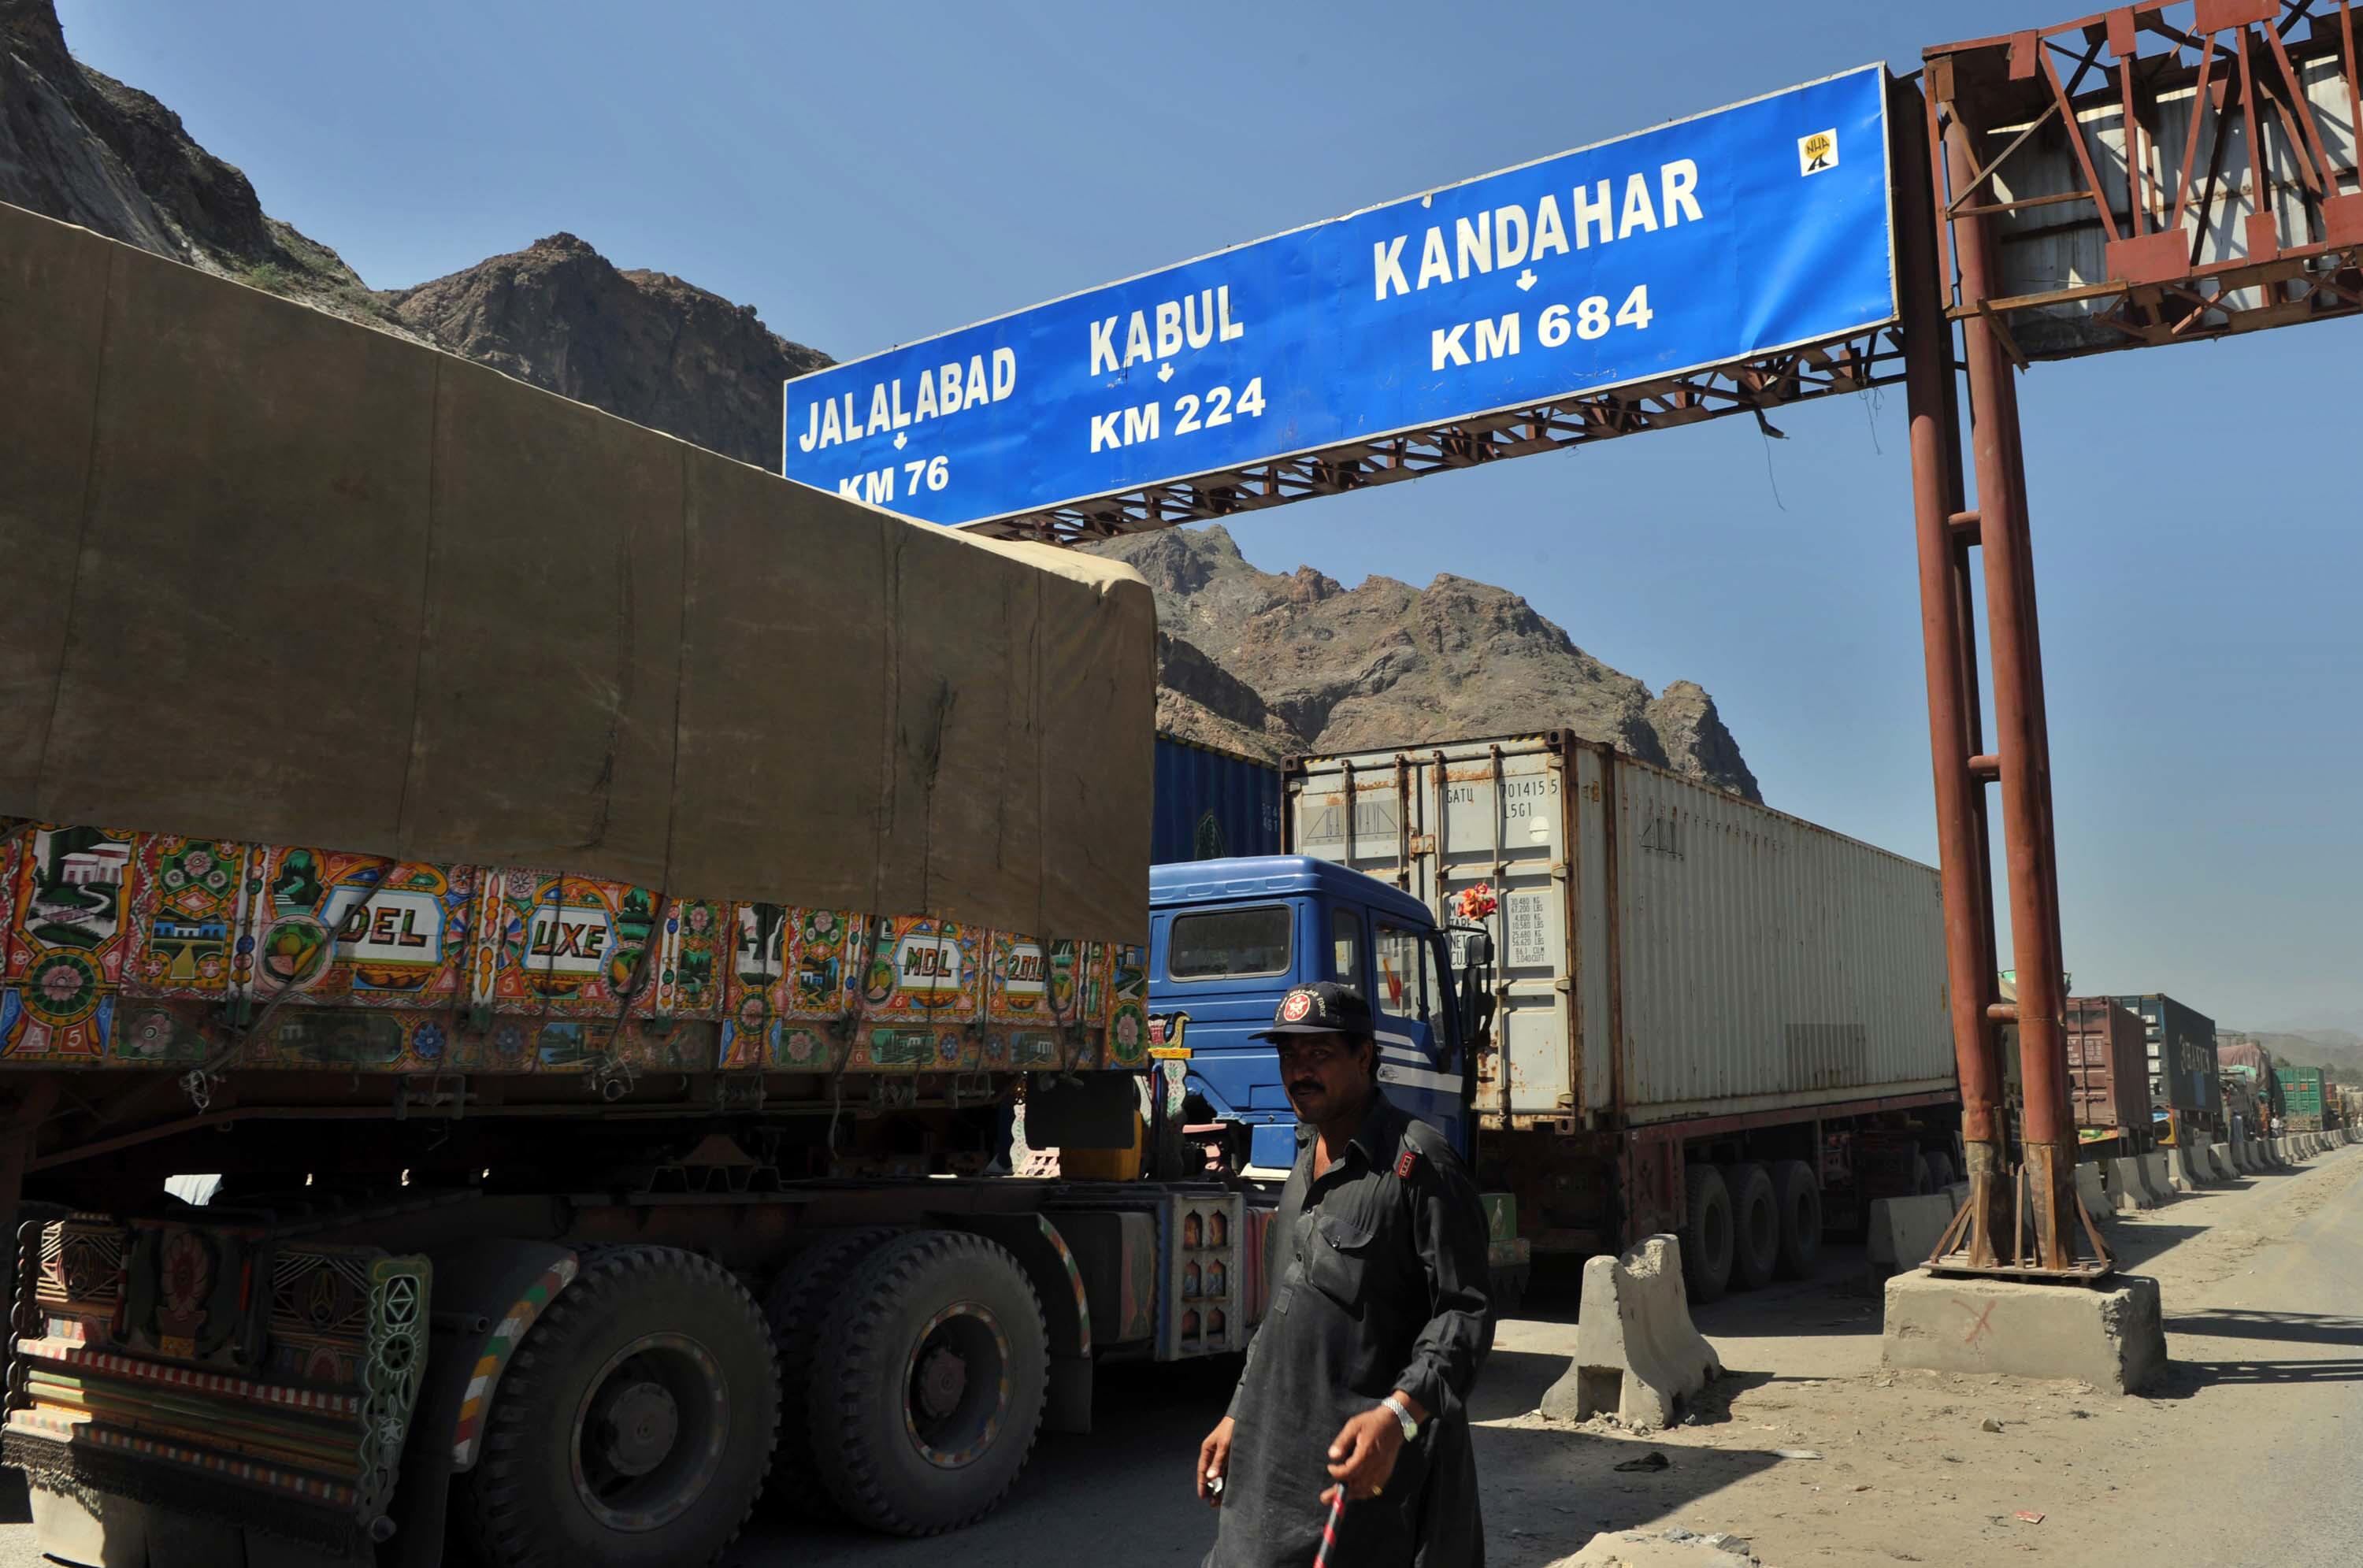 trucks were temporarily parked at the terminal photo afp file